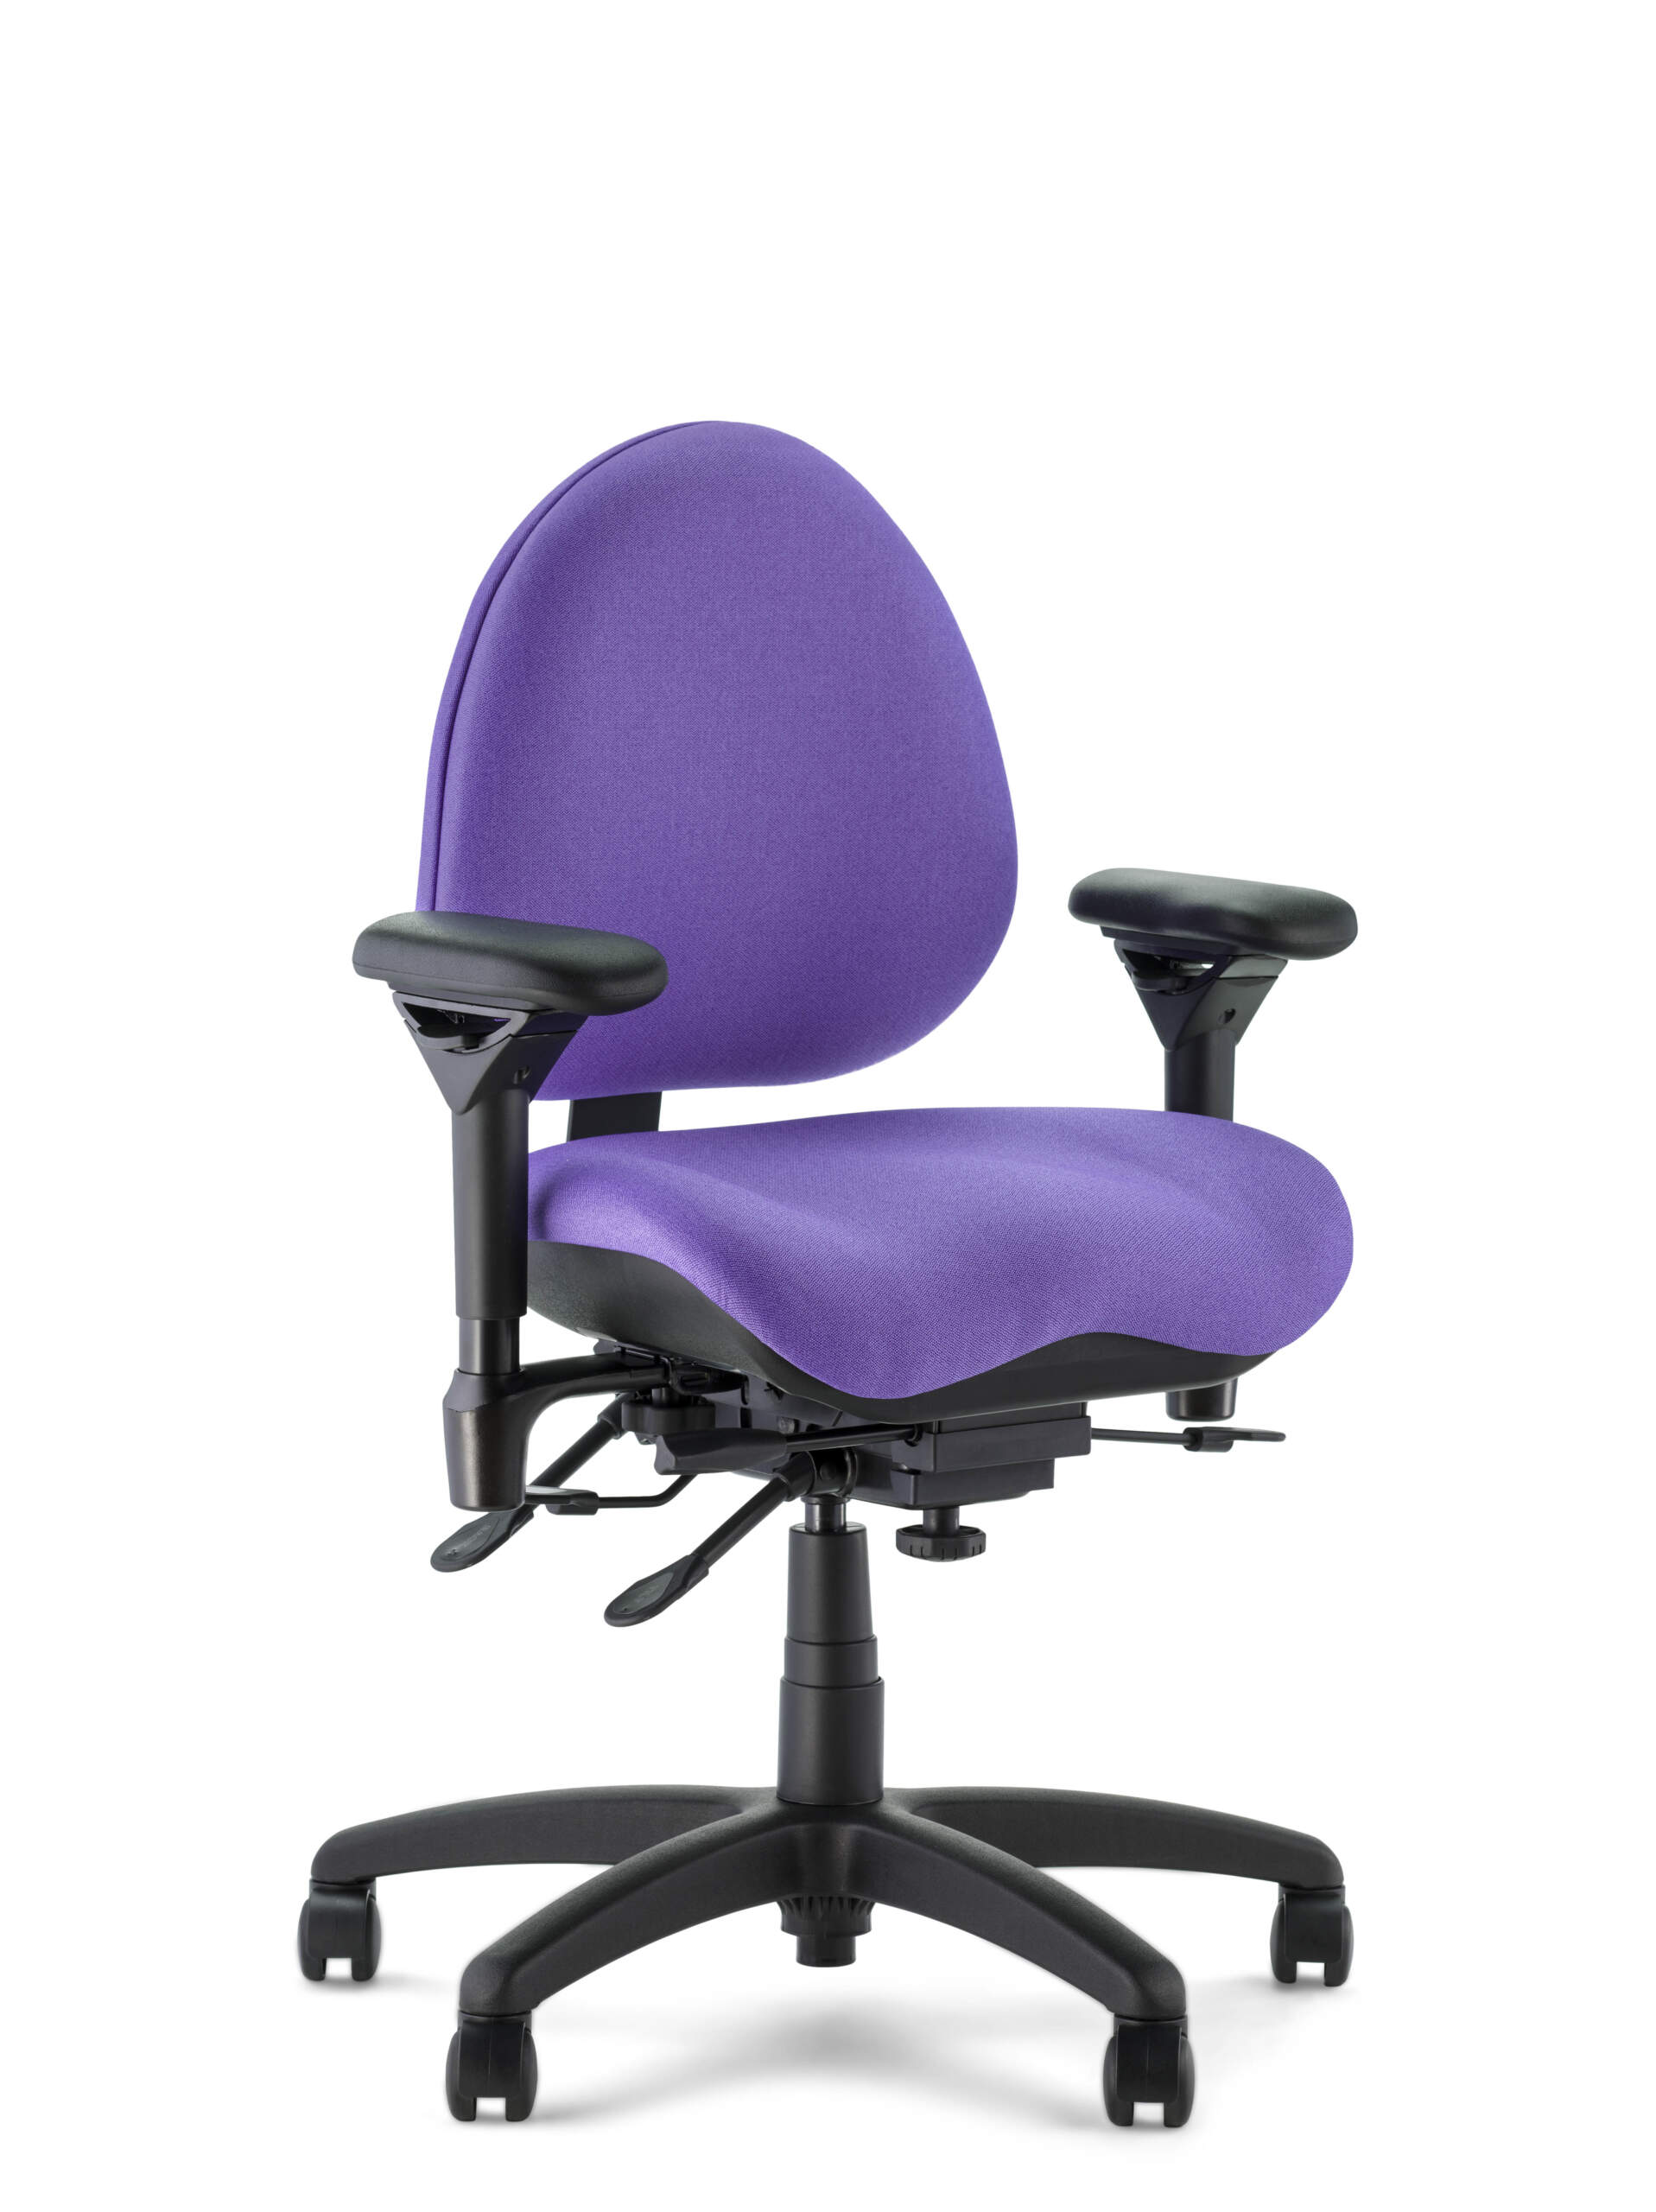 Right Angle view of J757 with purple Hyacinth fabric optima arms and black base